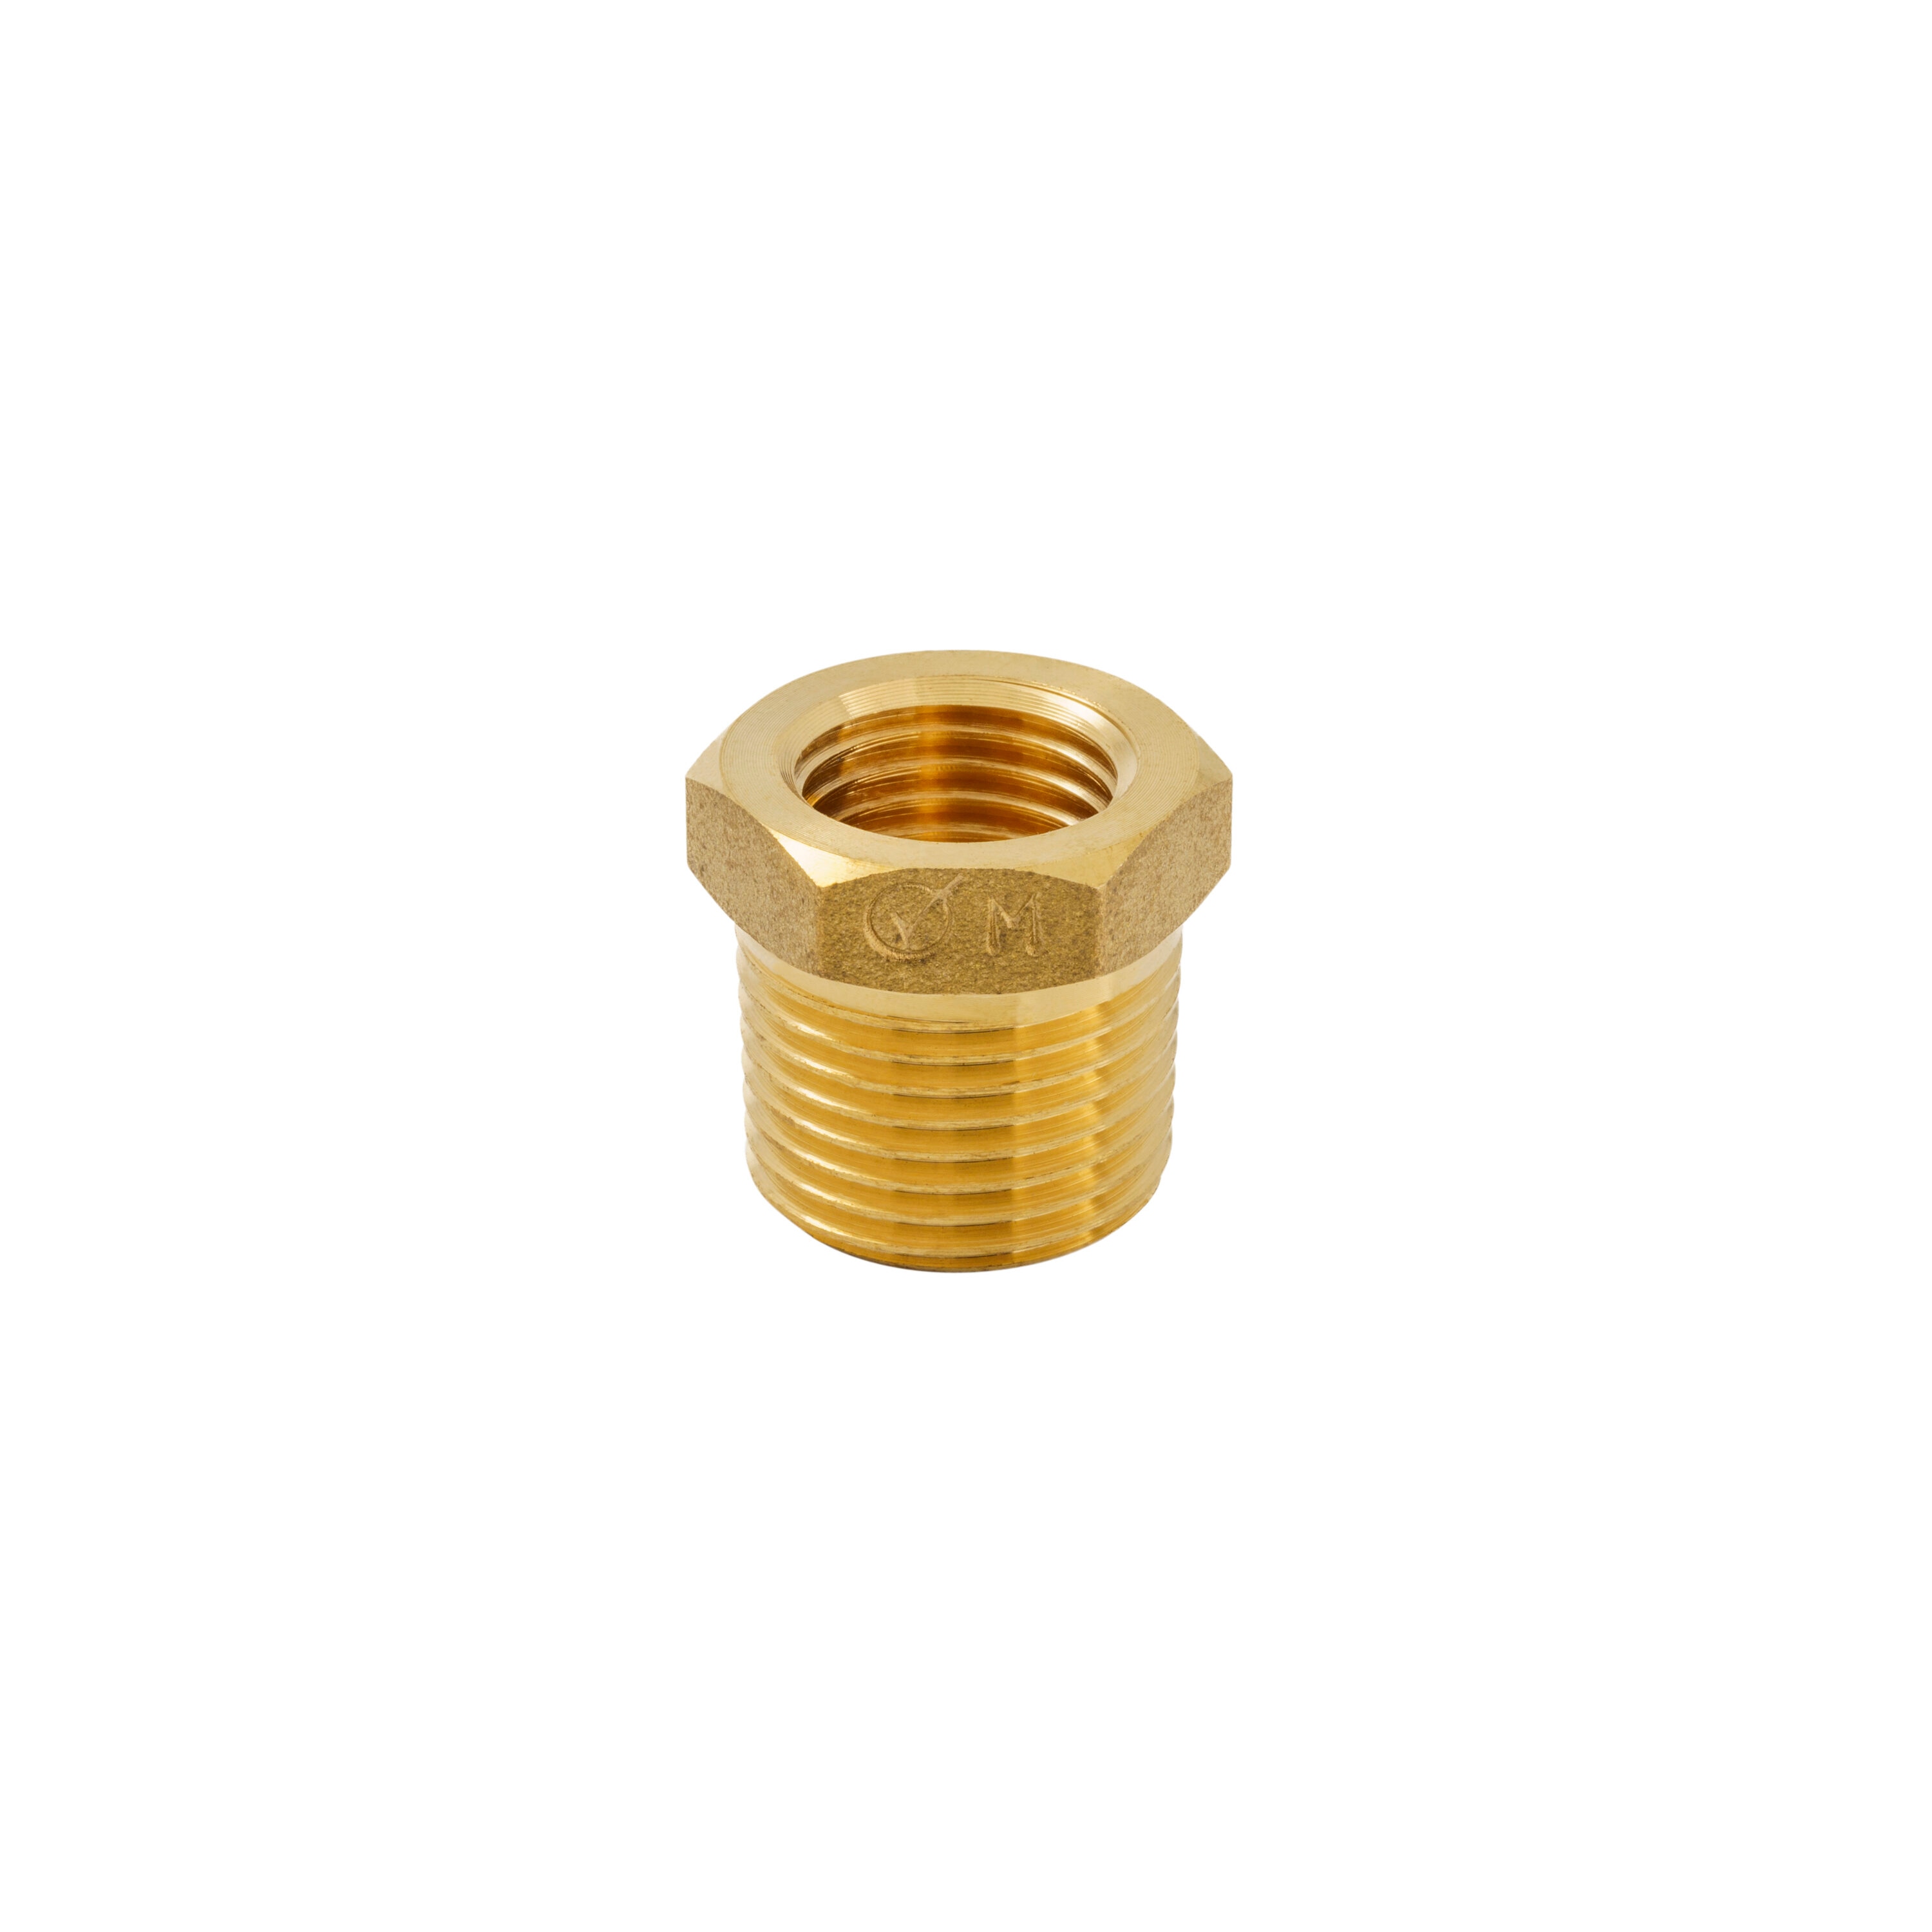 B&K 3/8-in Threaded Male Adapter Bushing Fitting in Gold | BF-778NLB